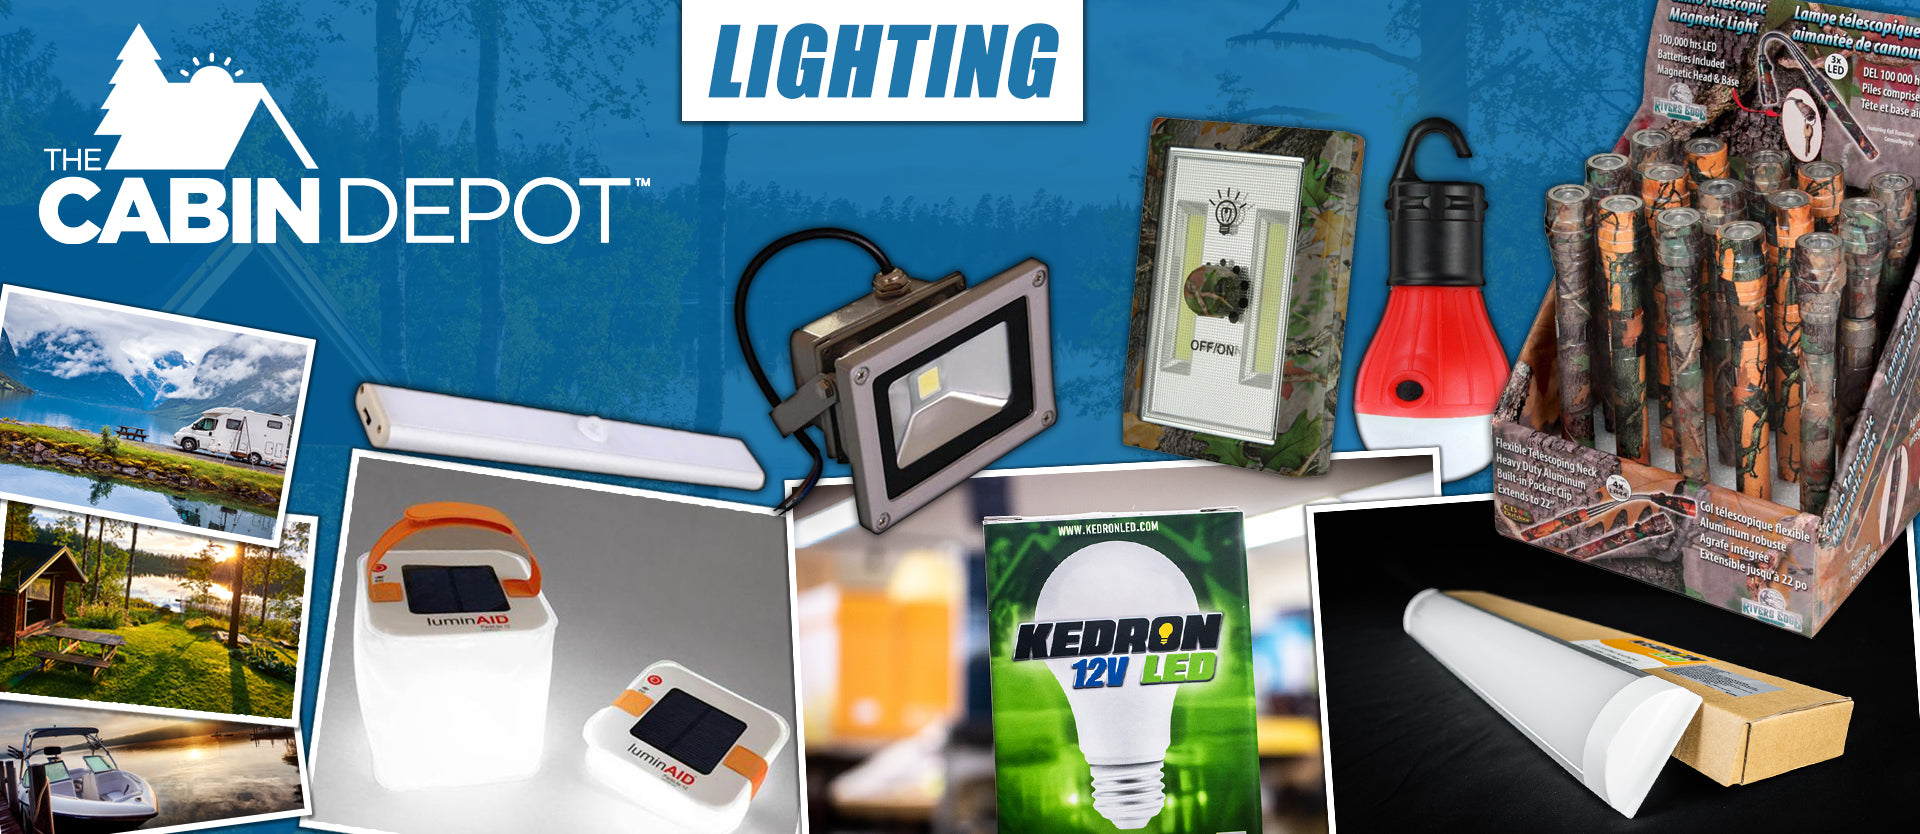 Lighting Off Grid The Cabin Depot ™ Canada